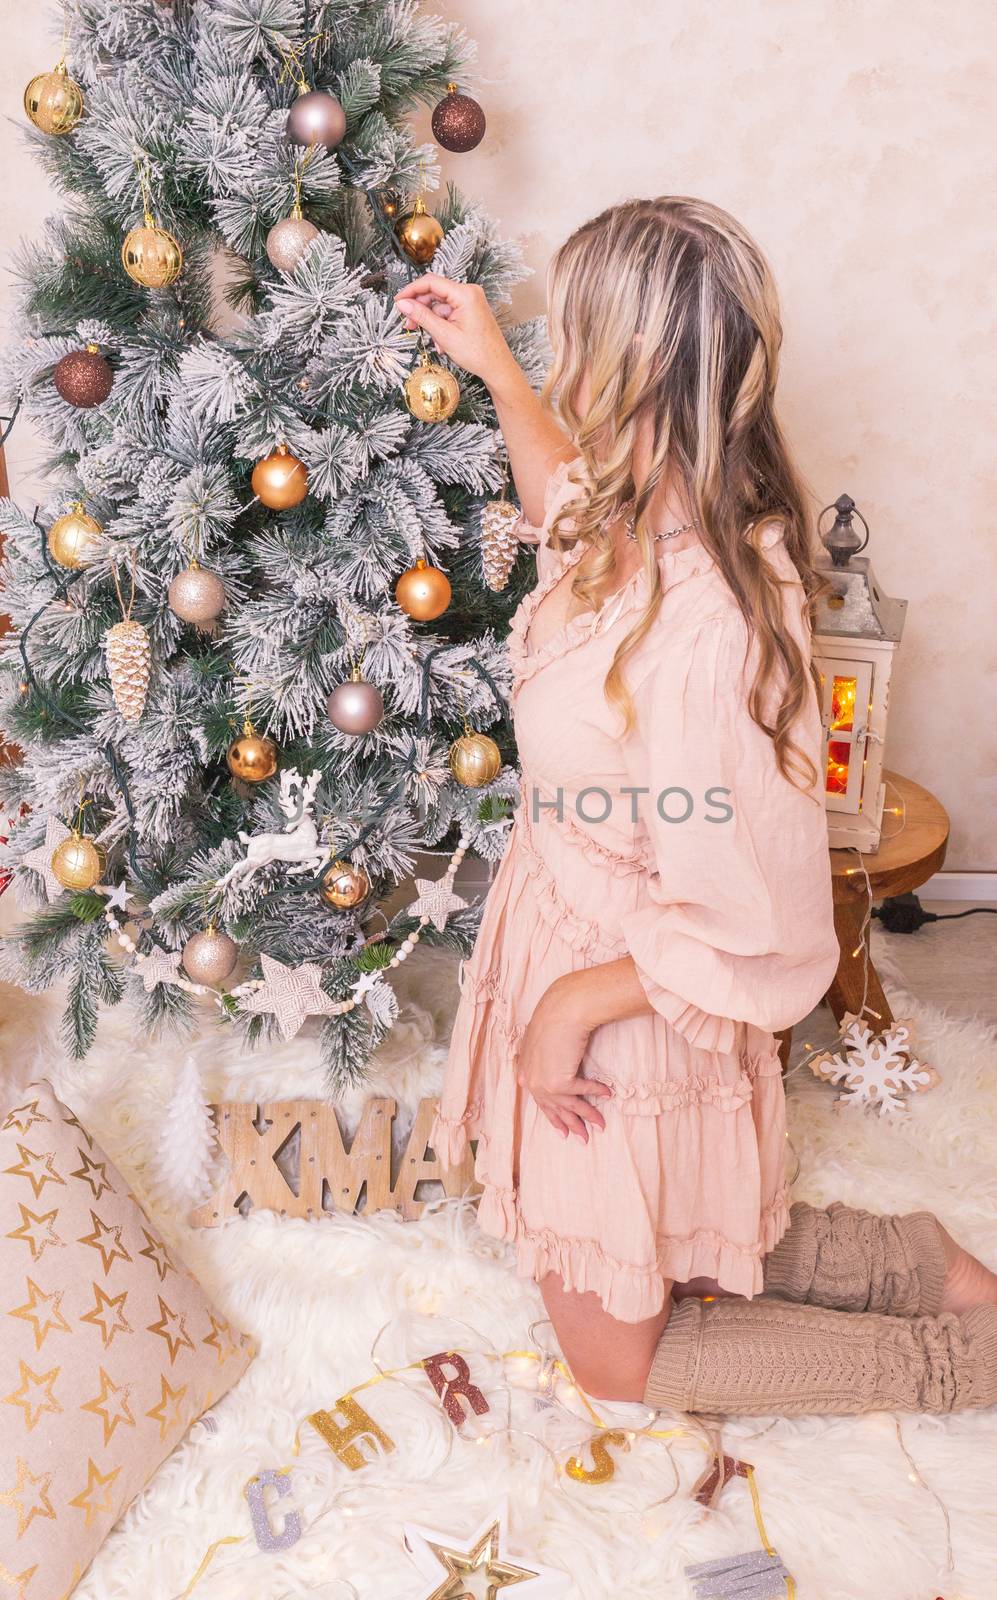 A woman decorates the Christmas tree with festive Christmas ornaments